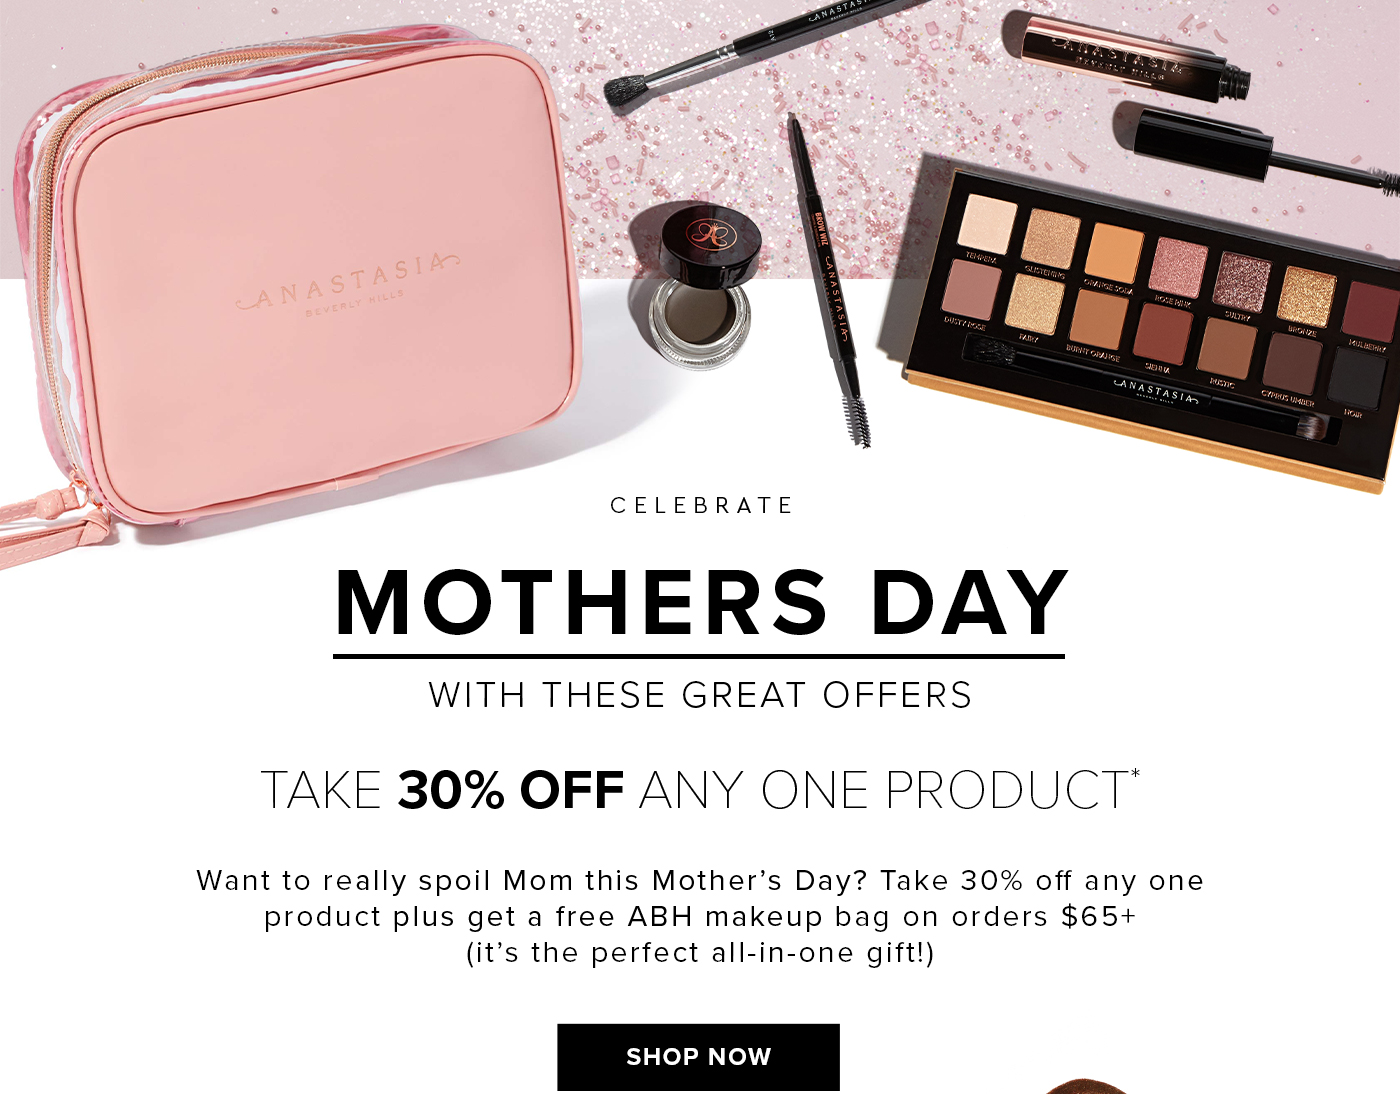 CELEBRATE MOTHERS DAY WITH THESE GREAT OFFERS. TAKE 30% OFF ANY ONE PRODUCT* Want to really spoil Mom this Mother''s Day? Take 30% off any one product plus get a free ABH makeup bag on orders $65+ (it''s the perfect all-in-one gift!) SHOP NOW